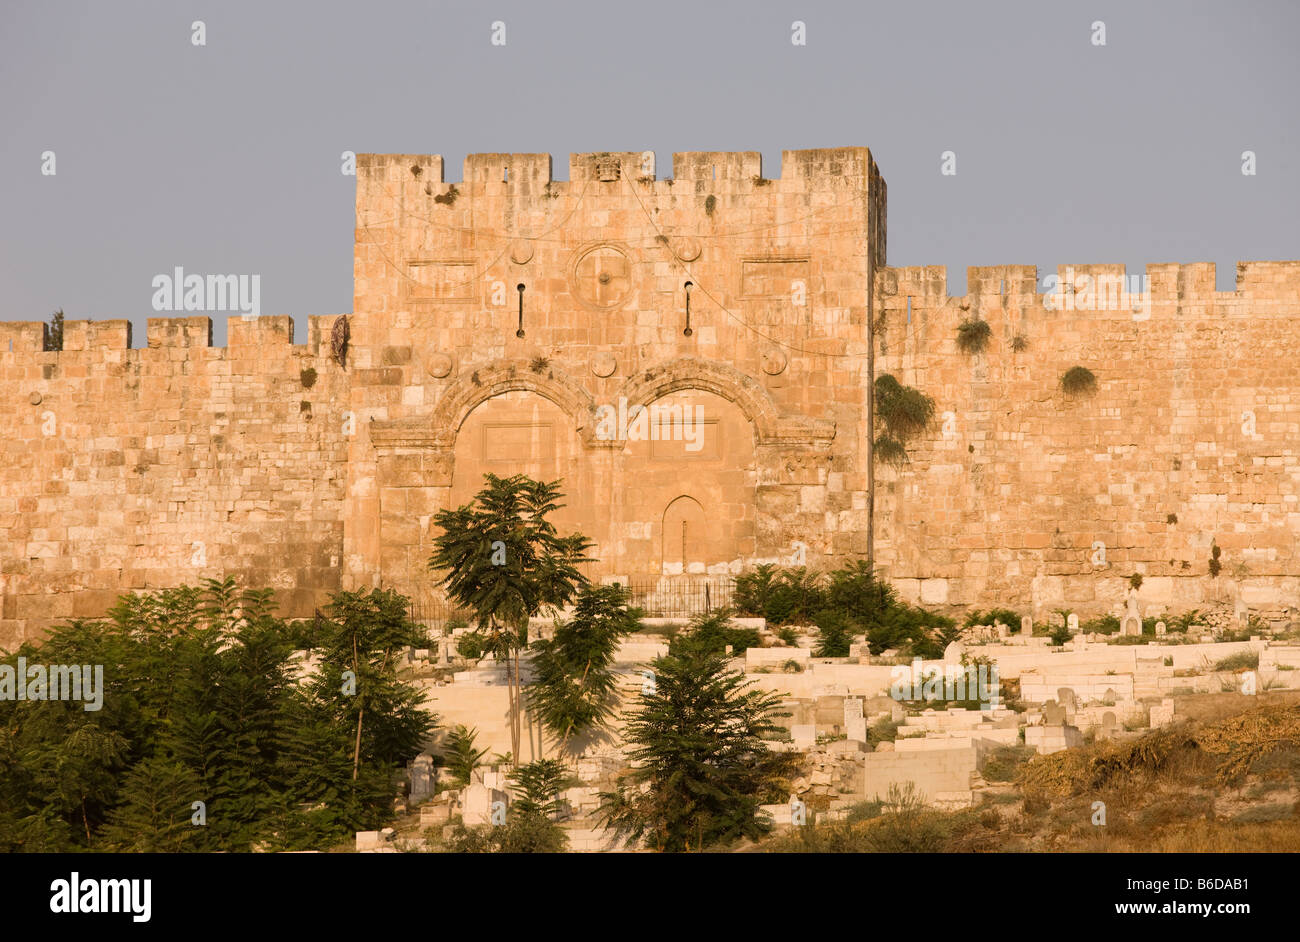 GOLDEN GATE OF THE TEMPLE MOUNT OLD CITY WALLS JERUSALEM ISRAEL Stock Photo